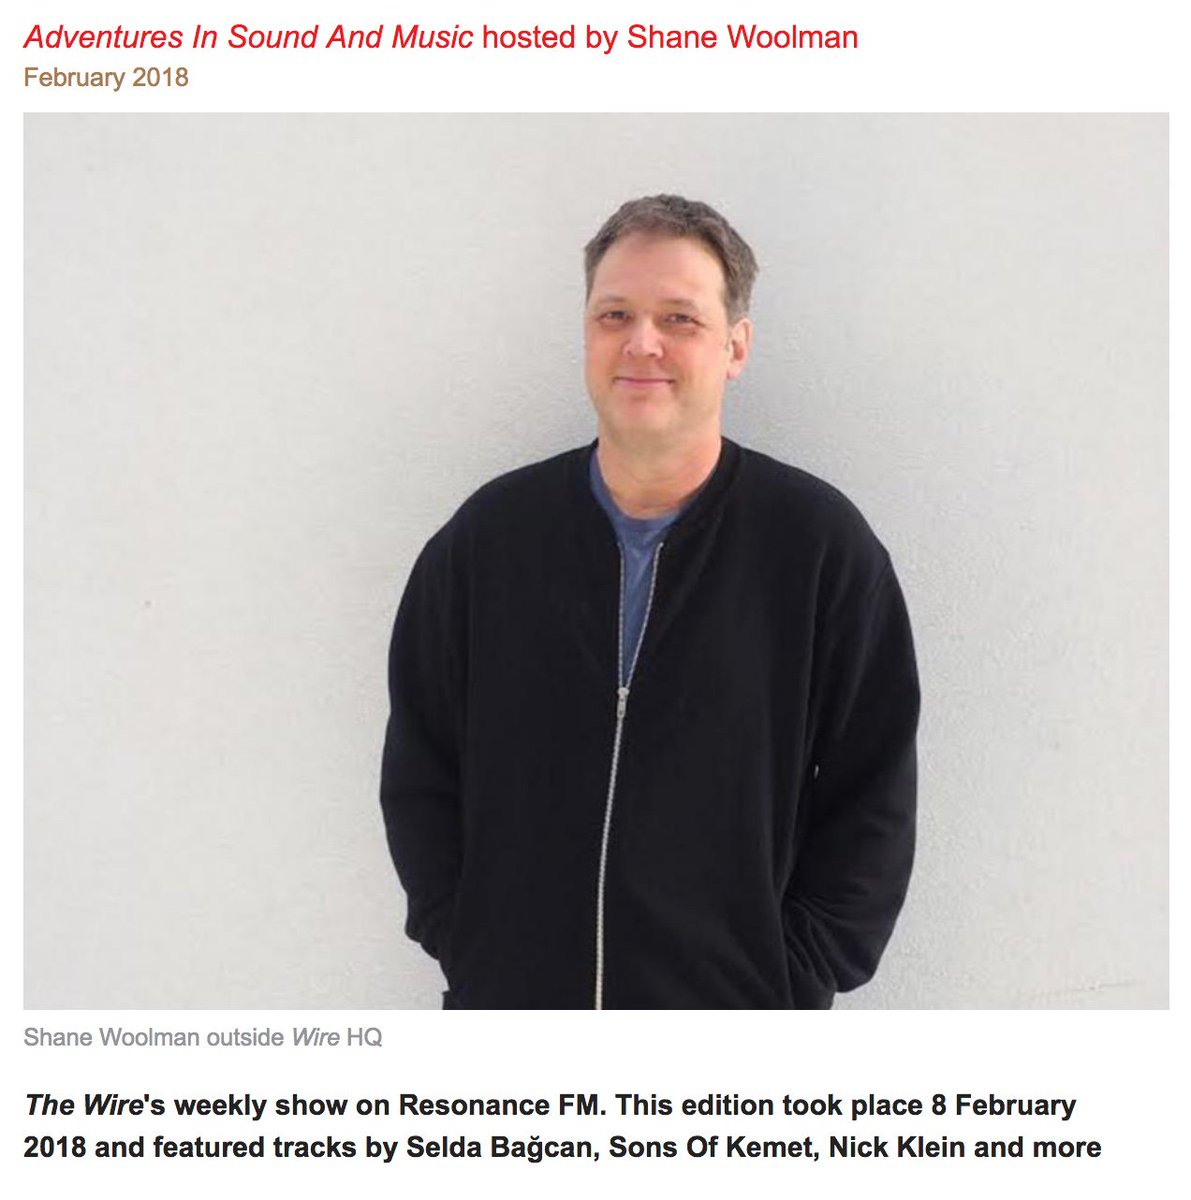 Thank you @shanewoolman @thewiremagazine for including JOHN 3:16 'Into The Abyss' taken from 'עשר' to the latest Adventures In Sound And Music Show
thewire.co.uk/audio/on-air/a…
Listen/Like/Repost:
mixcloud.com/TheWireMagazin…
@john316john316 @mixcloud #ambient #noise #occult #experimental